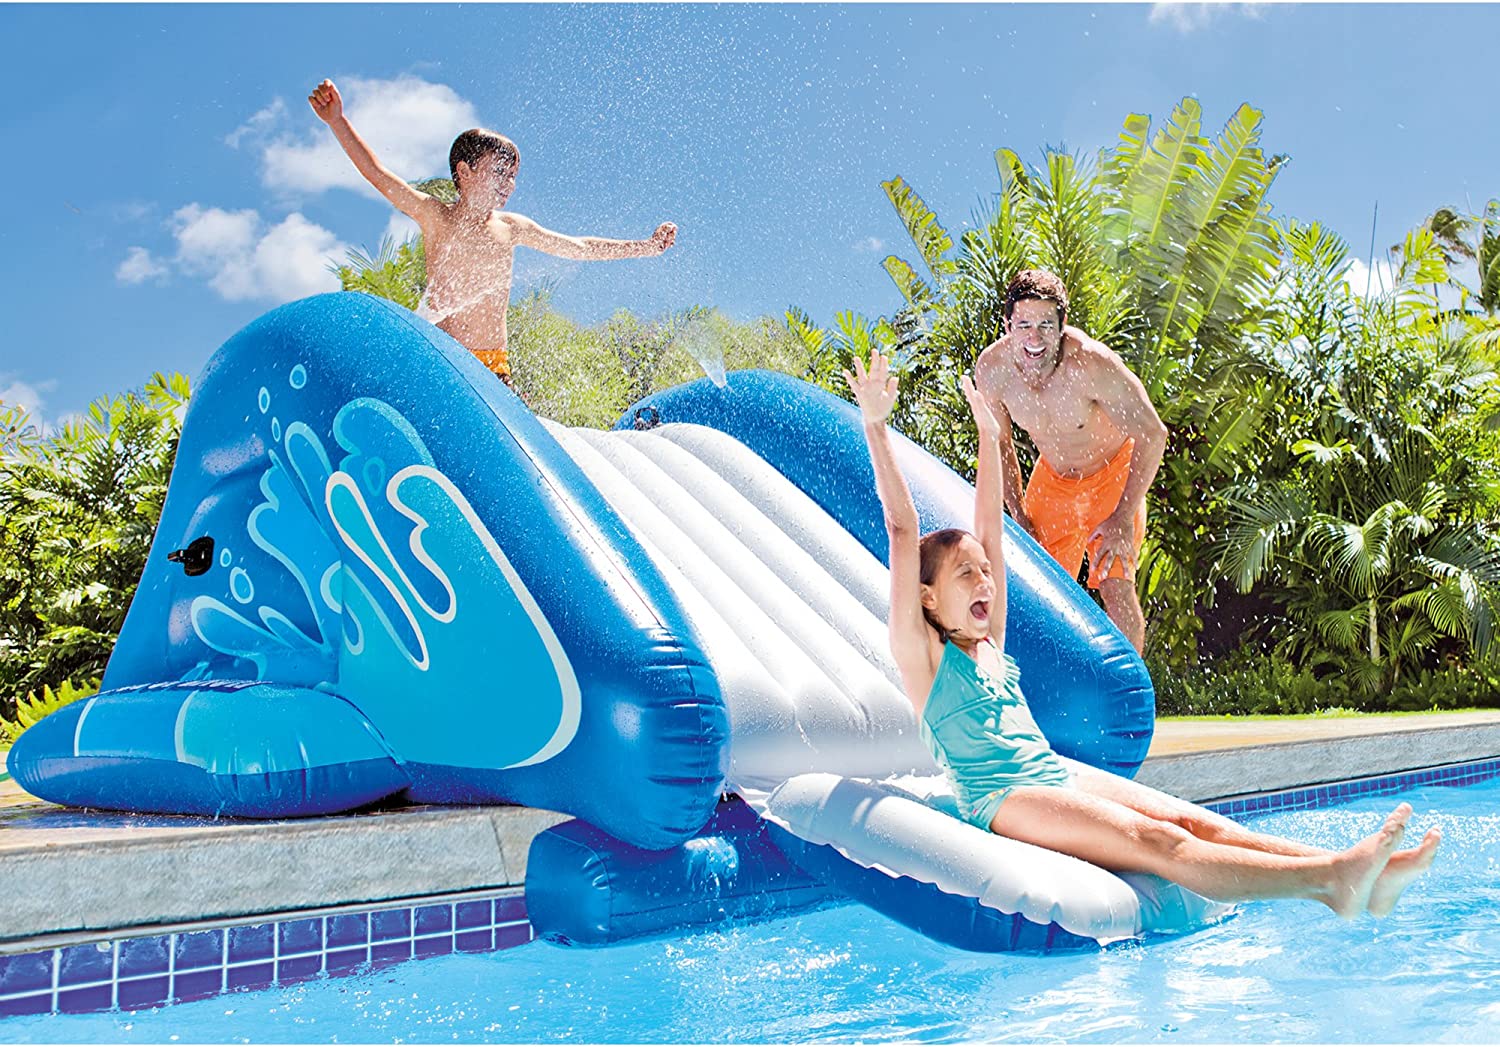 Intex 58849EP Kool Splash Durable Inflatable Play Center Swimming Pool with Built In Sprayers for Kids and Adults, Age 6 and Up , Blue